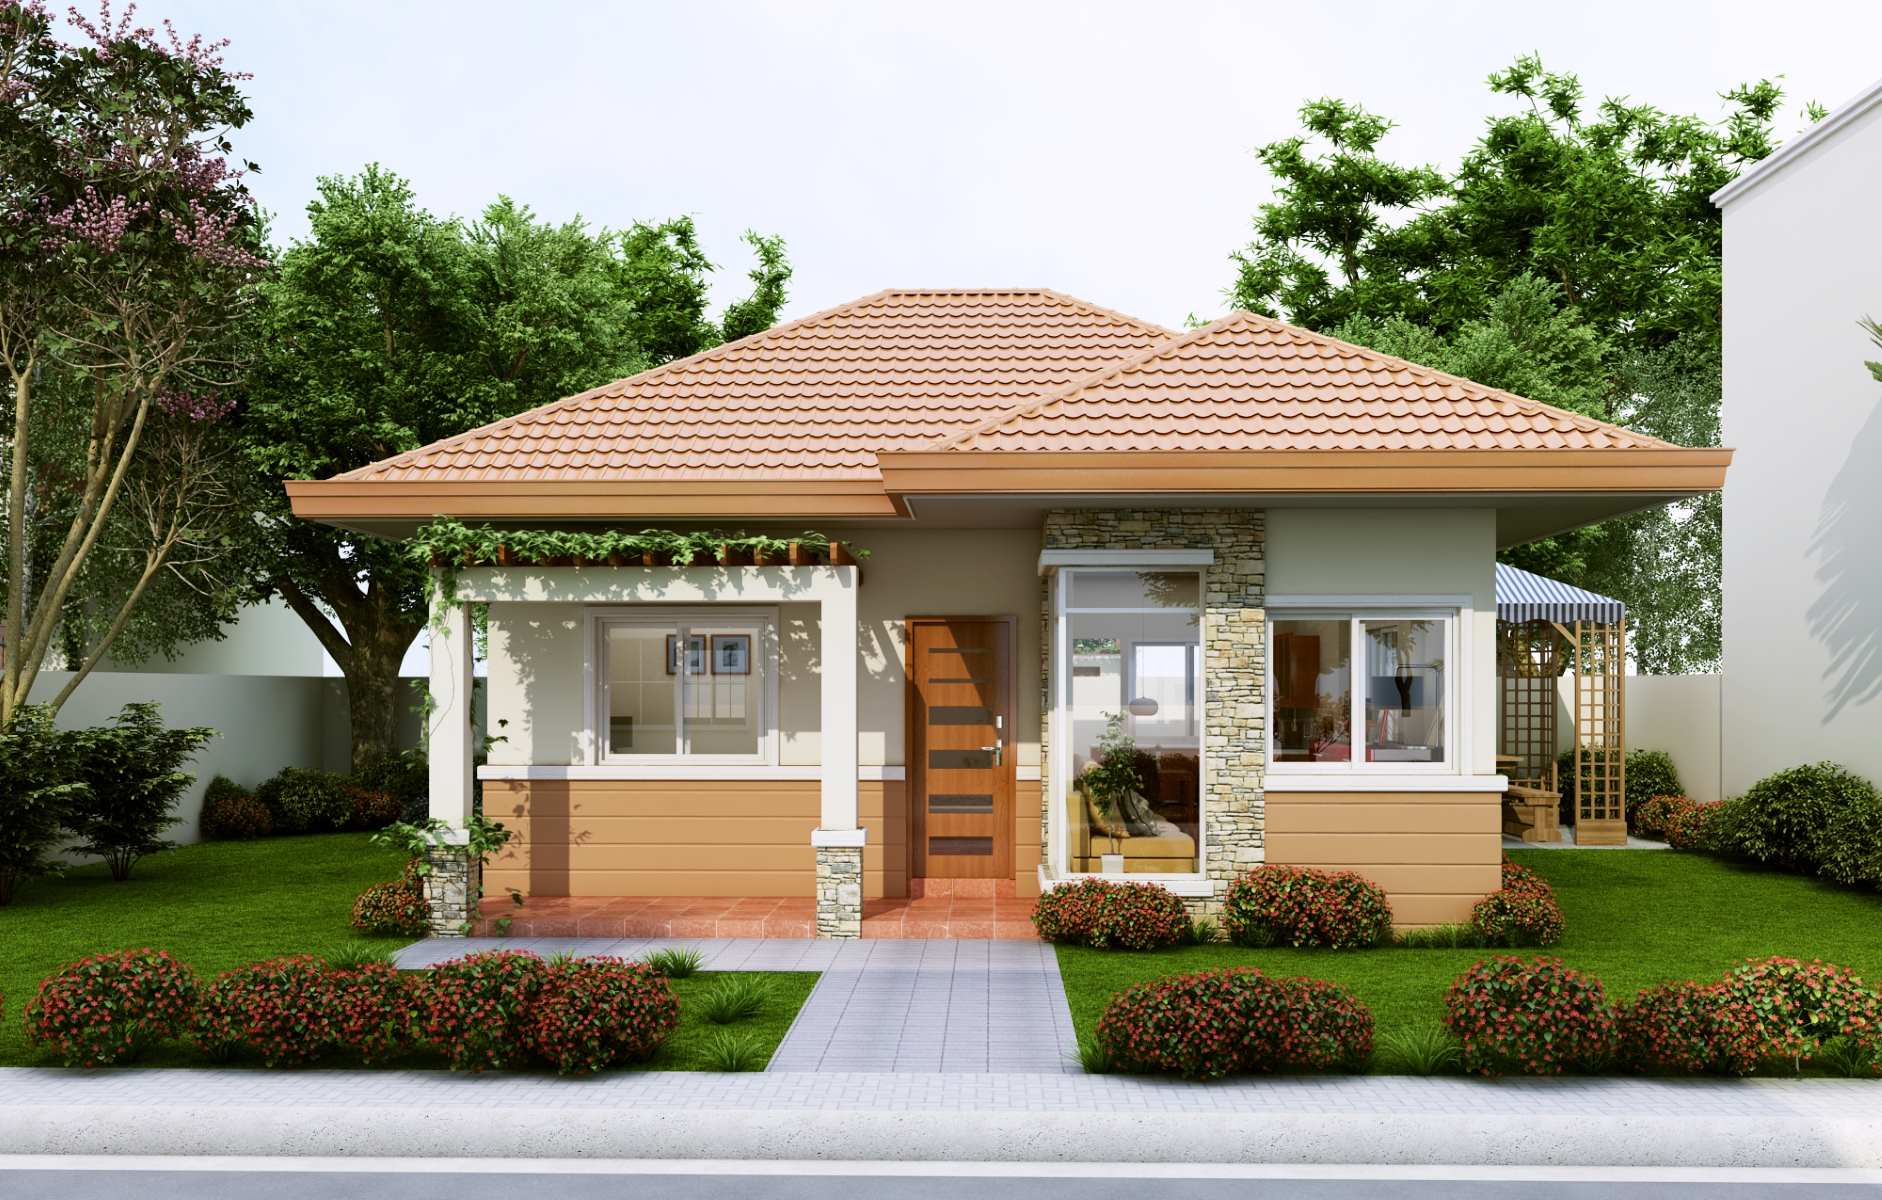 How Much Is A House Design In The Philippines